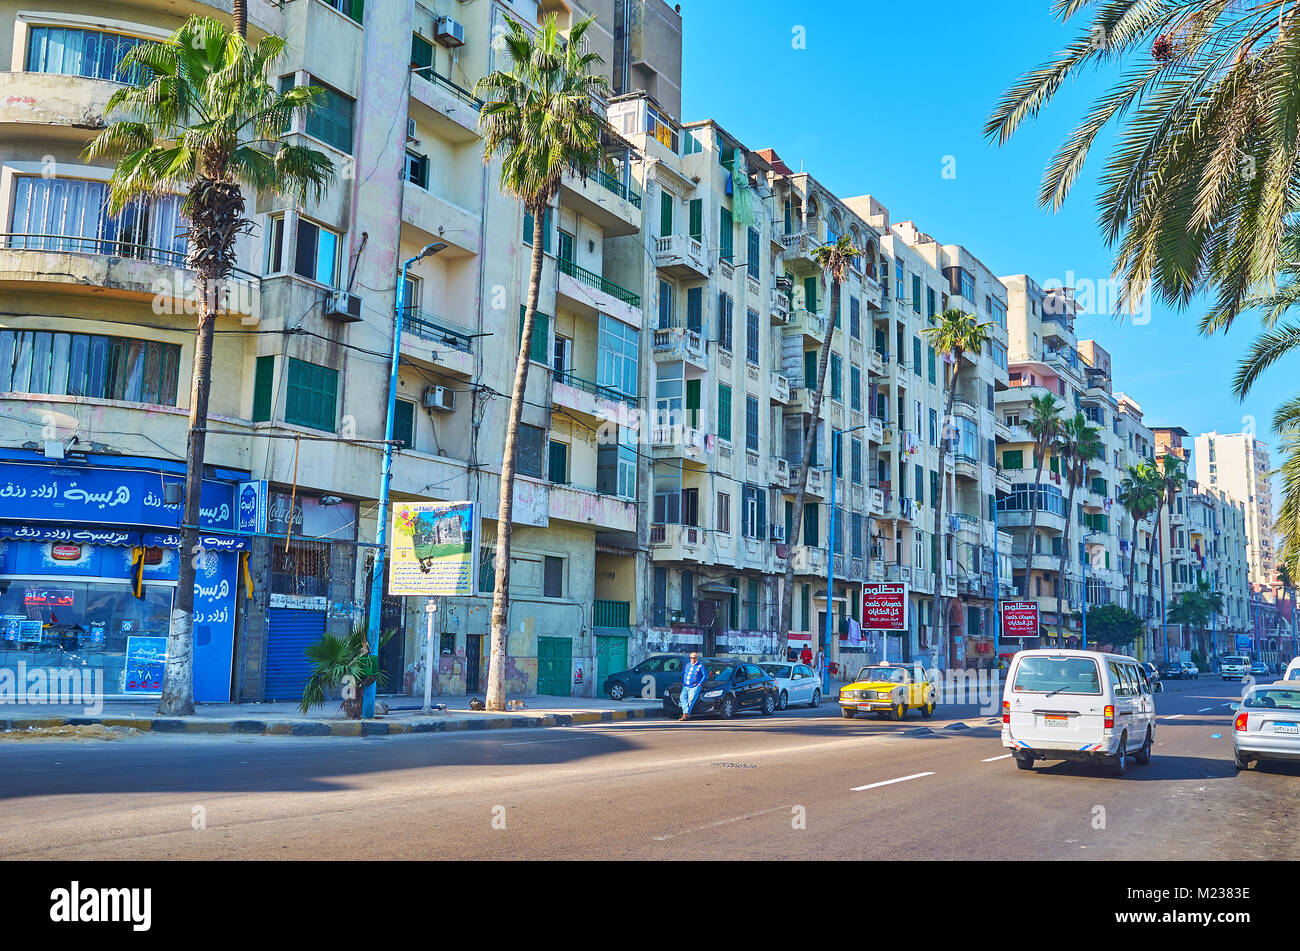 ALEXANDRIA, EGYPT - DECEMBER 17, 2017: The tall residential buildings along the road of Corniche avenue, on December 17 in Alexandria. Stock Photo